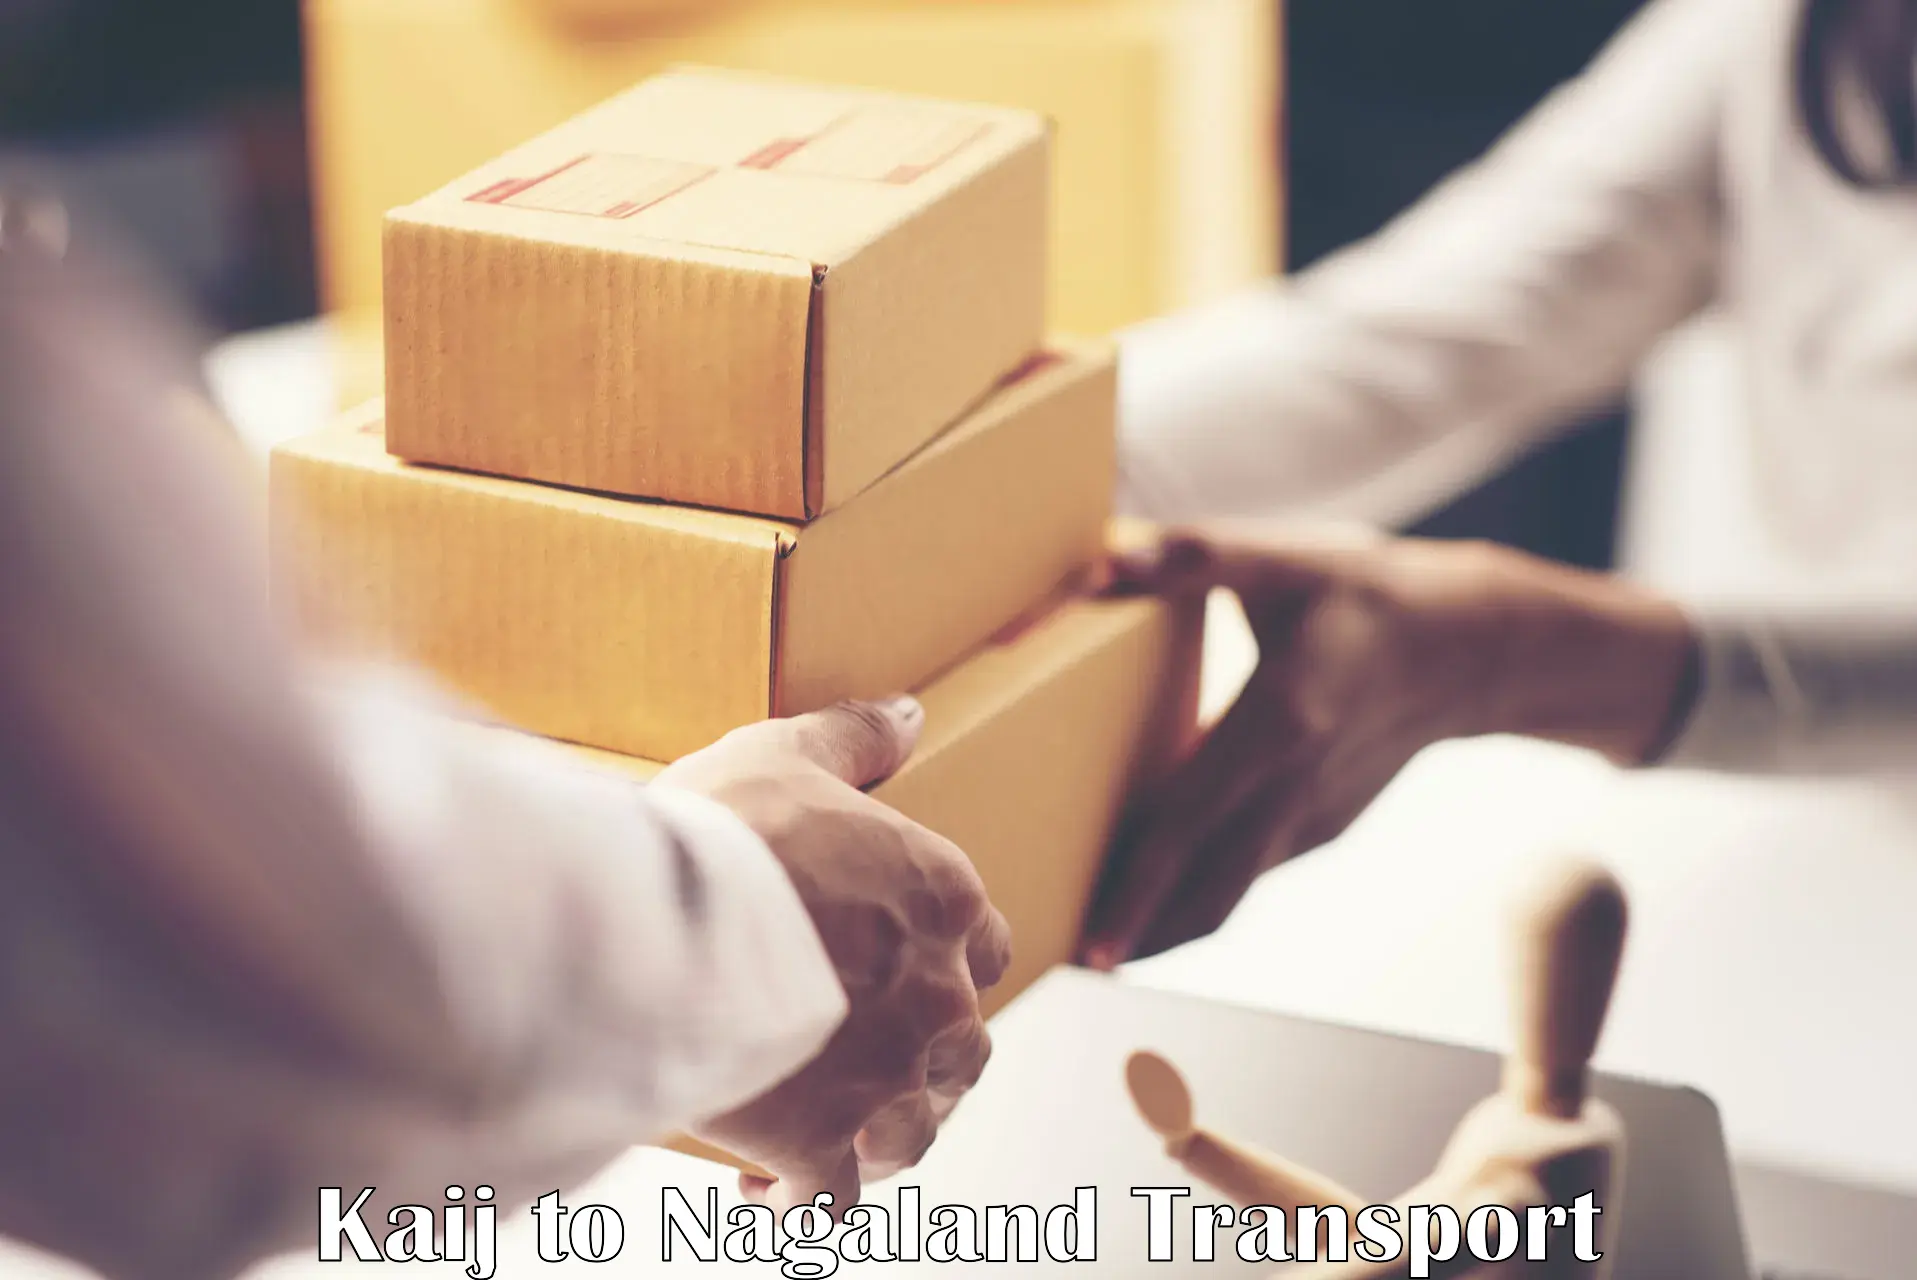 Nationwide transport services Kaij to Nagaland